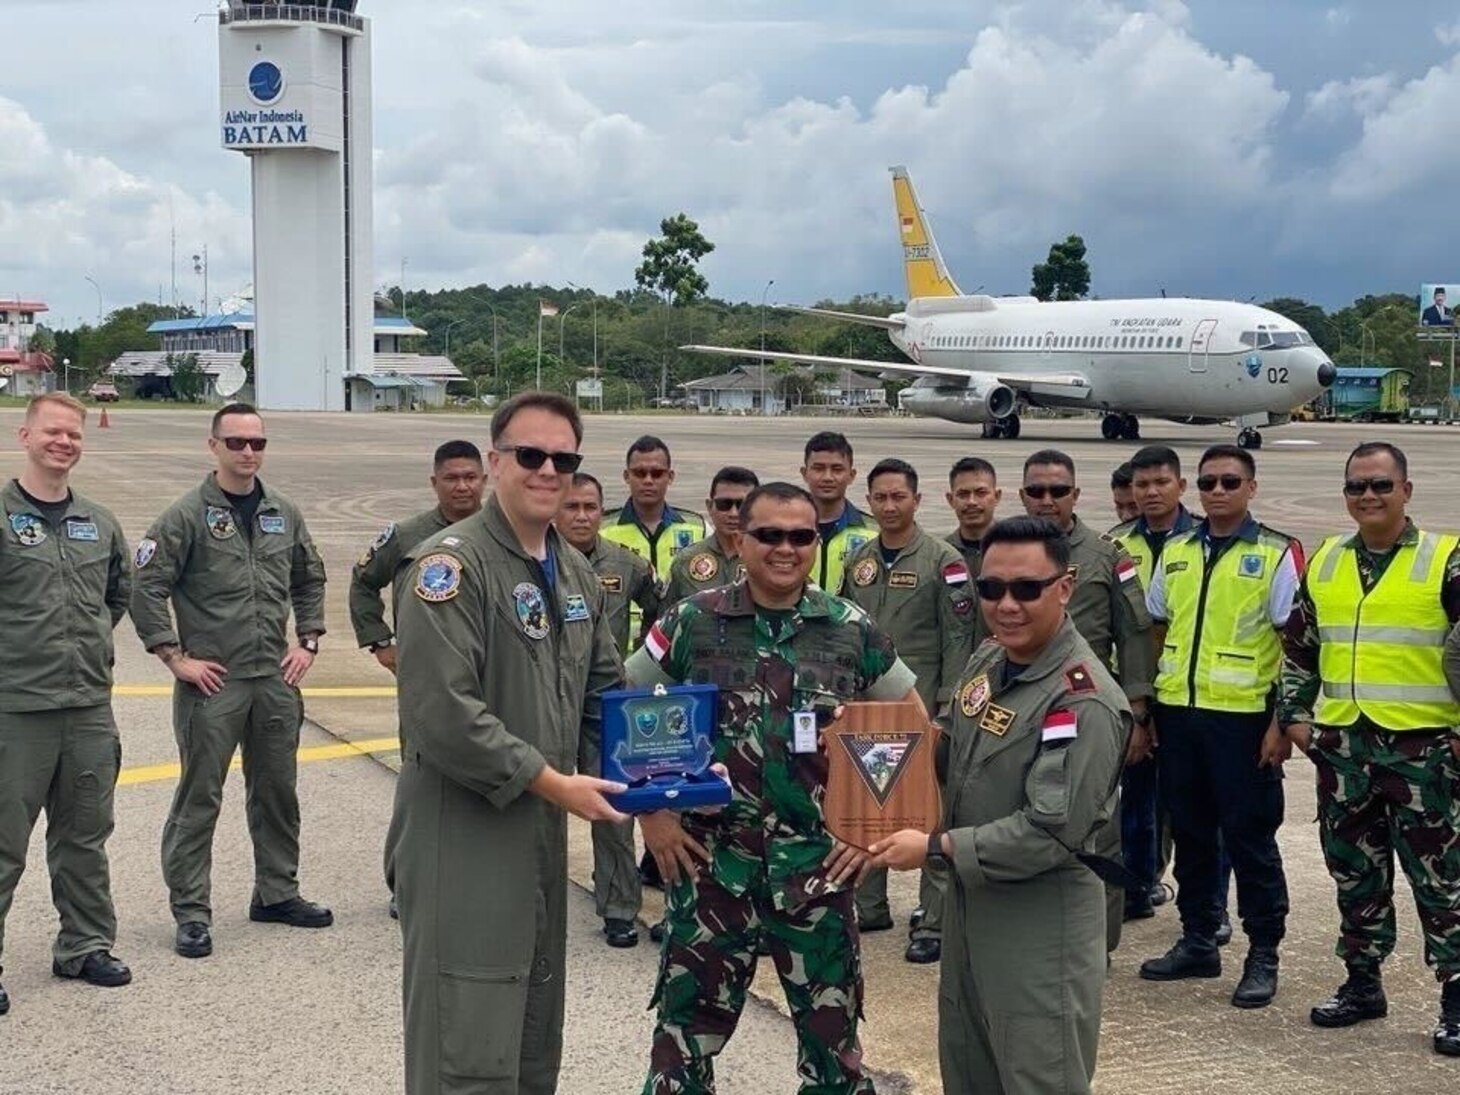 Lt. Bradley Bailey, a naval flight officer from Patrol Squadron (VP) 5, exchanges a gift with Maj. Hendro Sukamdani and Col. Dedy Ilham S. Salam of the Indonesian National Armed Forces, during Exercise Super Garuda Shield. Super Garuda Shield, a part of Operation Pathways and a longstanding annual, bilateral military exercise conducted between the U.S. military, Indonesia National Armed Forces, has now expanded to a multinational exercise encompassing 14 Nations. This exercise reinforces the U.S. commitments to our allies, and other regional partners reinforcing joint readiness, and the interoperability to fight and win together.